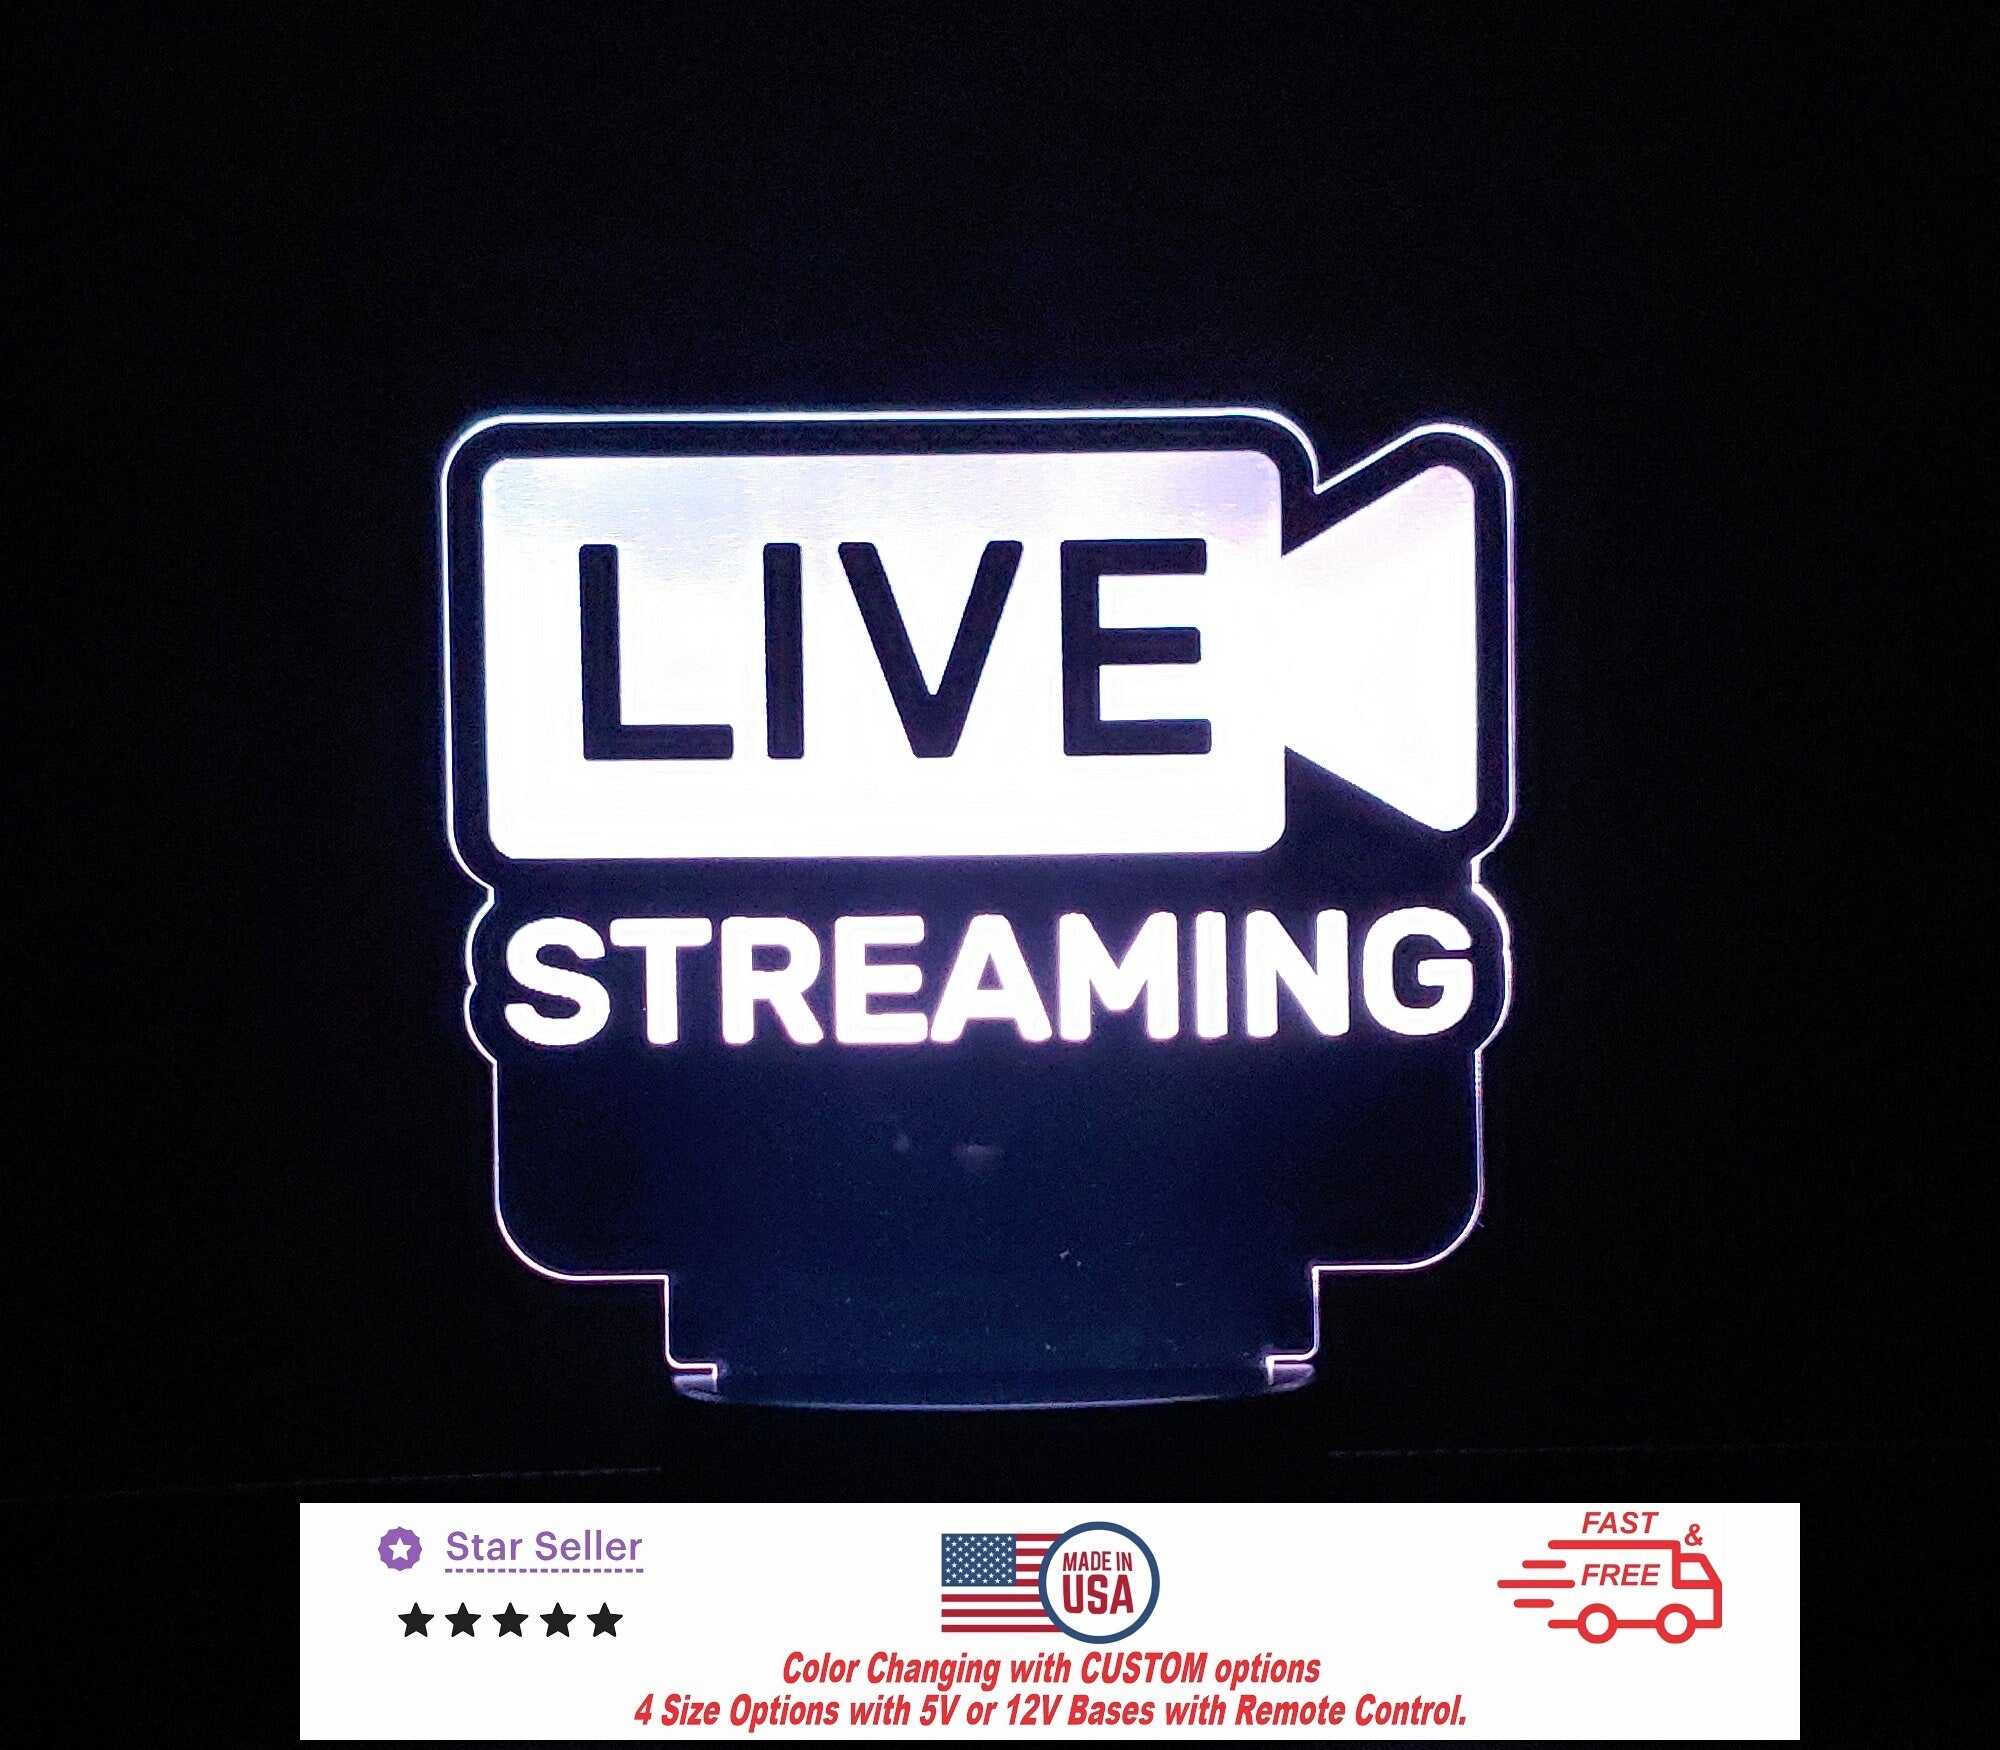 Live Streaming Personalized LED Night Light - Neon sign, Room Decor, Recording Music, Stream, Music Studio 4 sizes Free Shipping Made in USA